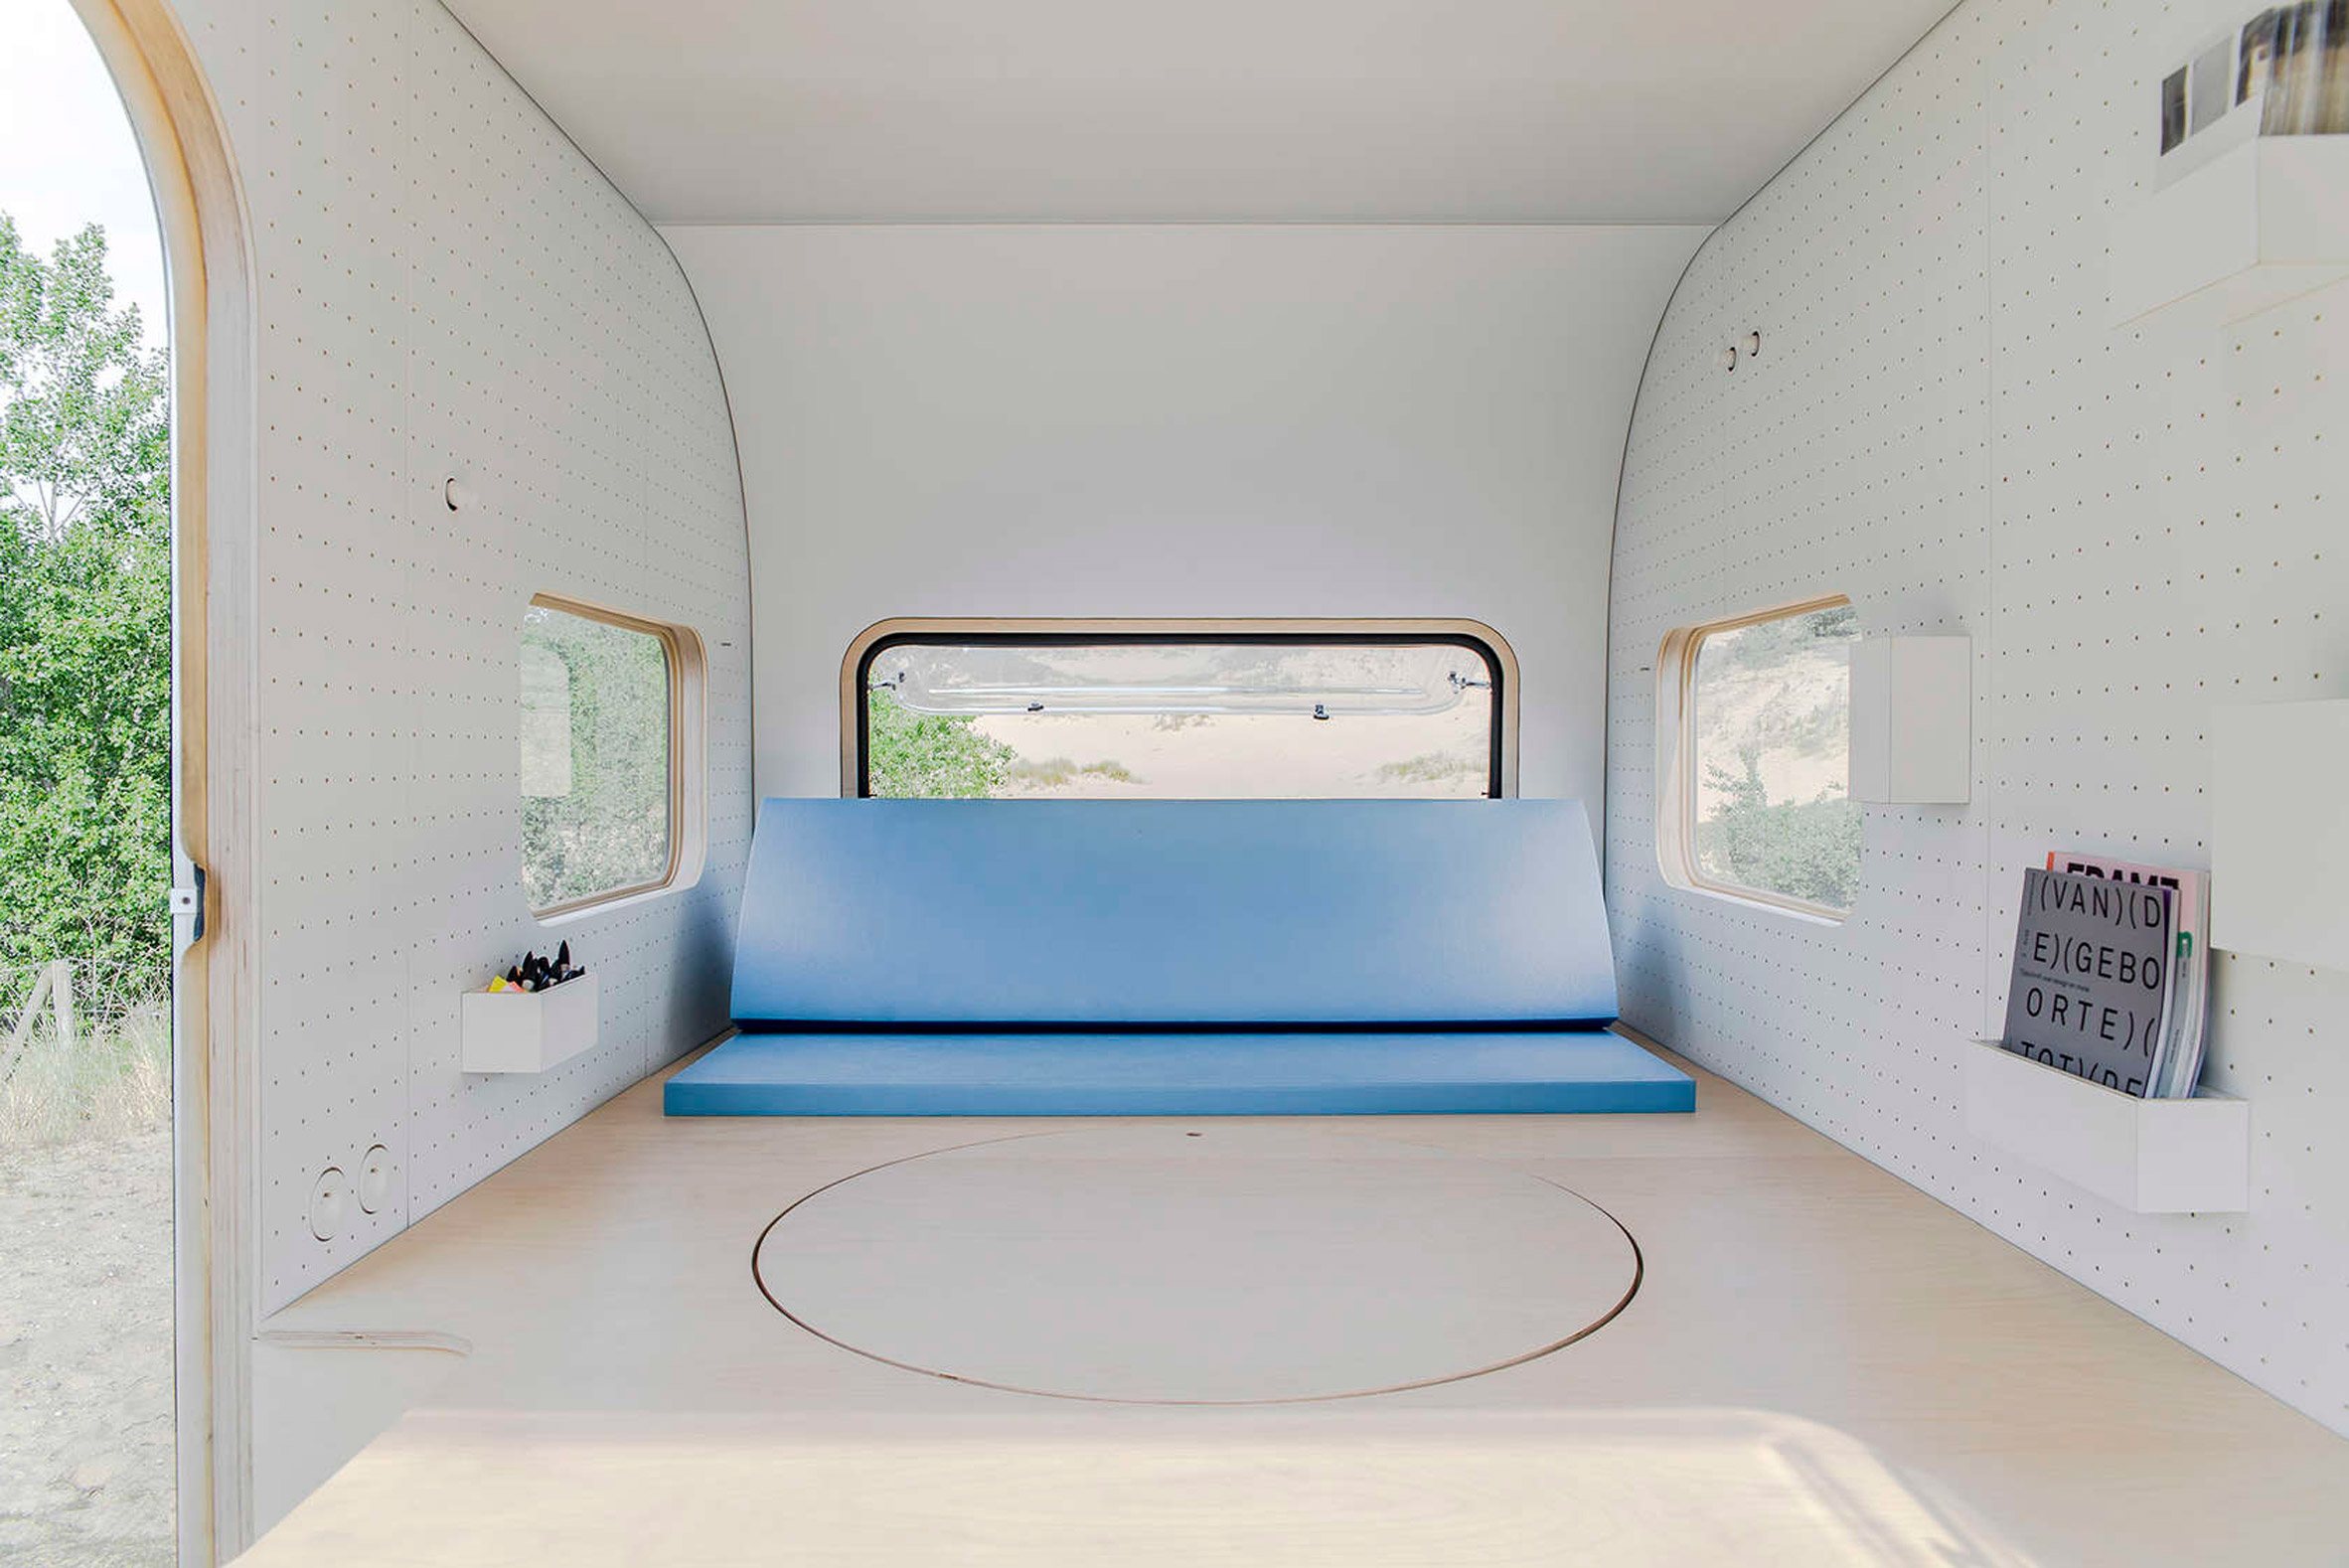 Five AM turns caravan into studio with pop-up table and pegboard walls